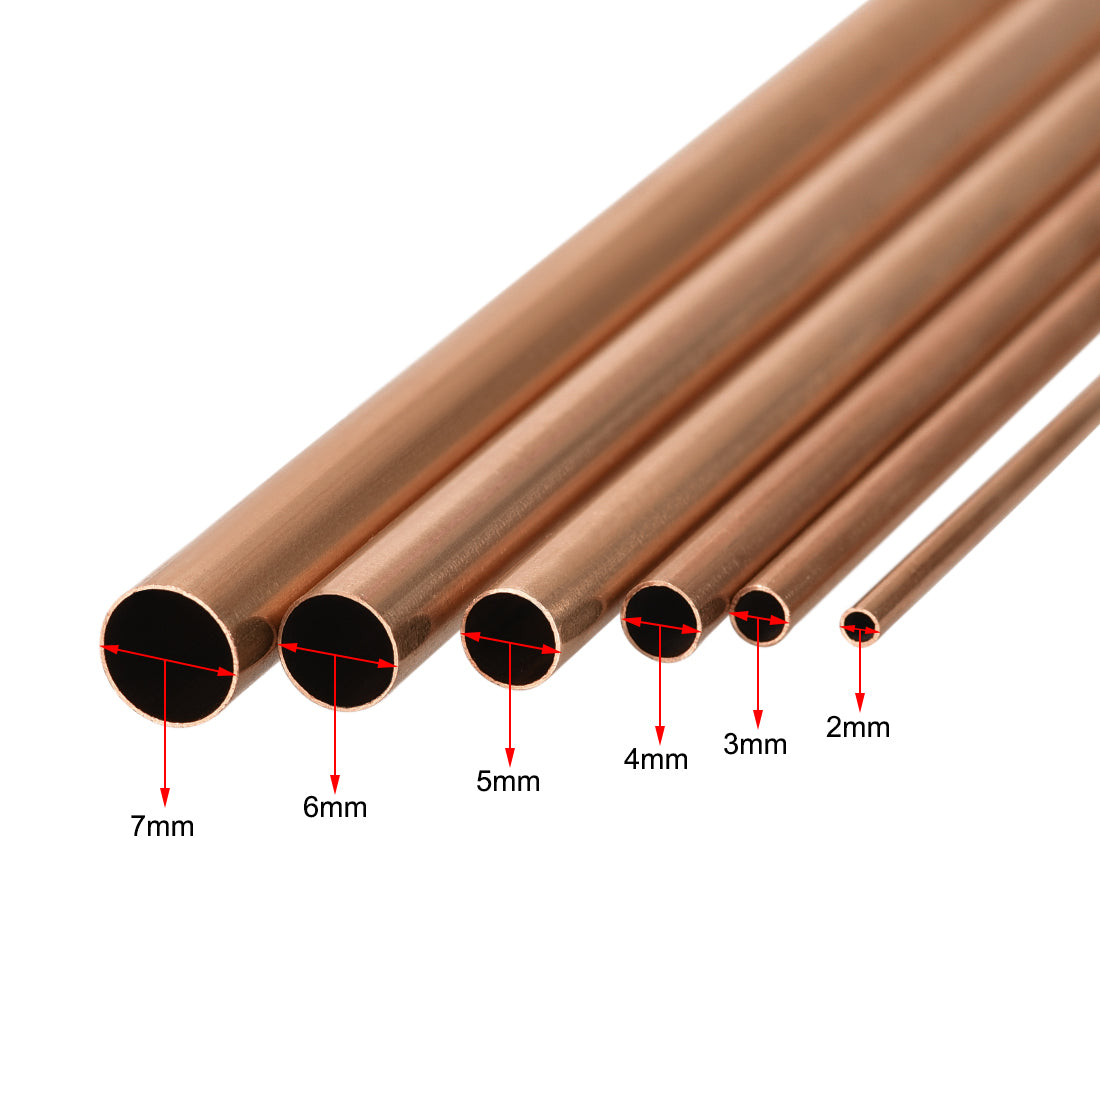 Uxcell Uxcell Copper Tube, 2mm 3mm 4mm 5mm 6mm 7mm OD x 0.5mm Wall Thickness 300mm Length Seamless Round Pipe Tubing, Pack of 6